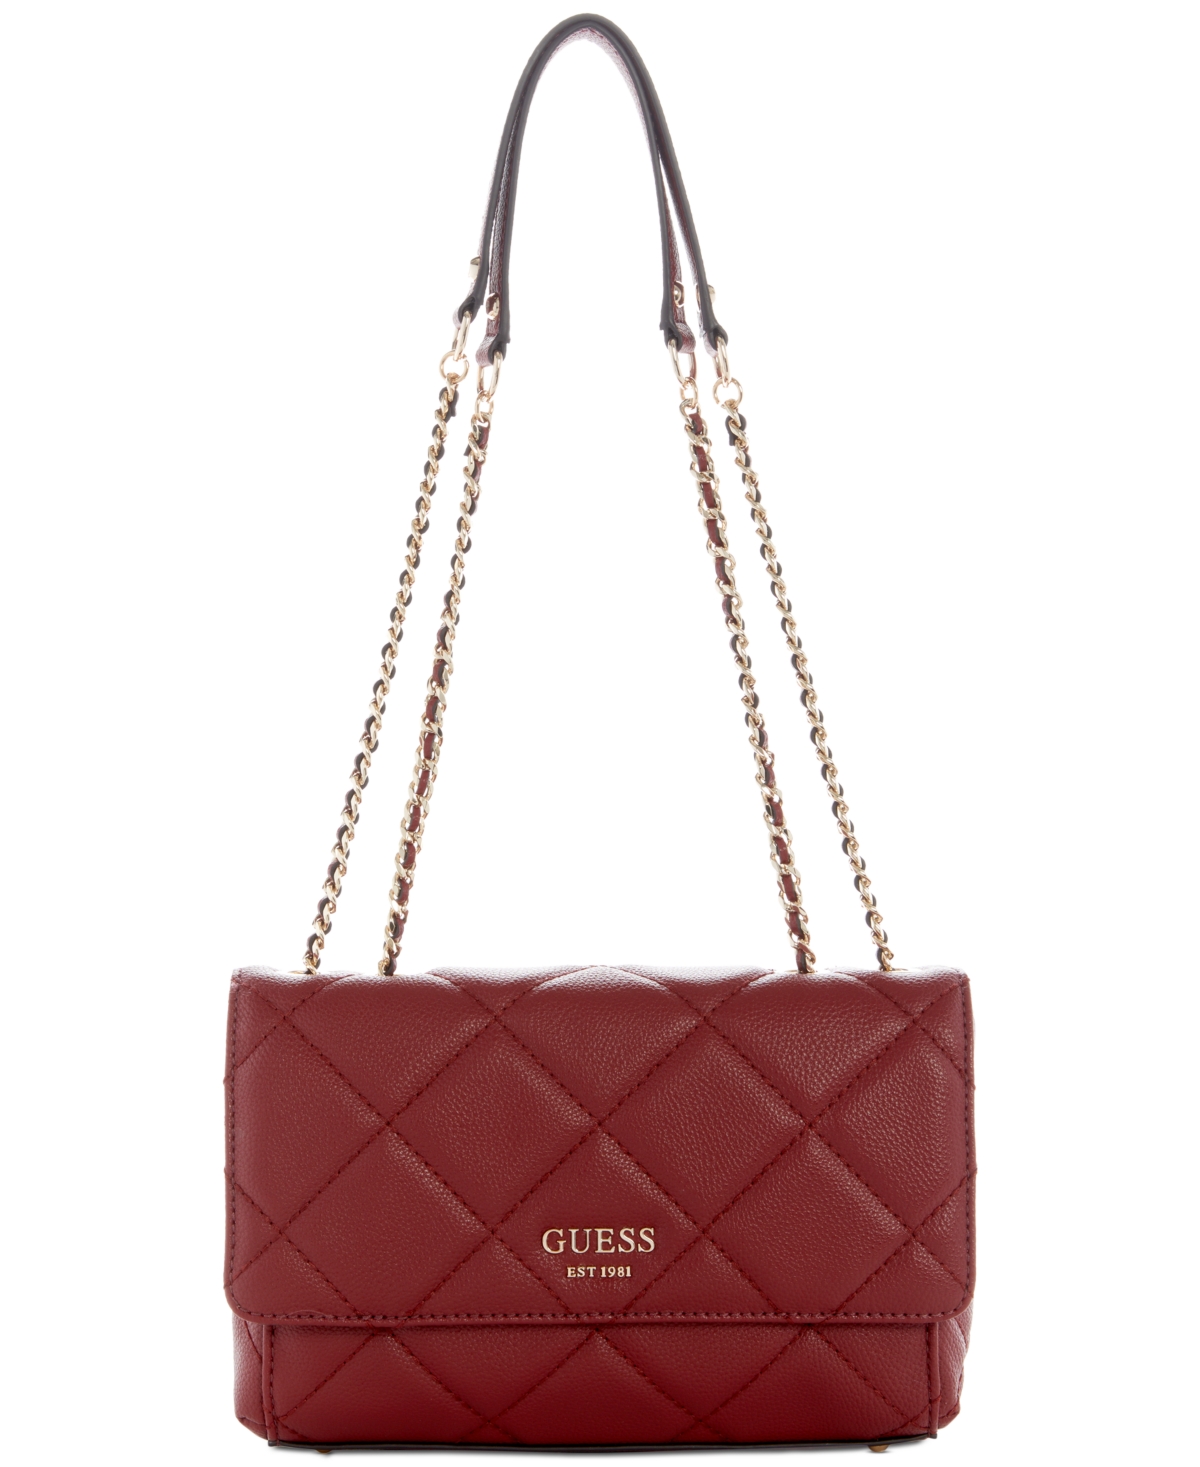 Guess Luxe bag